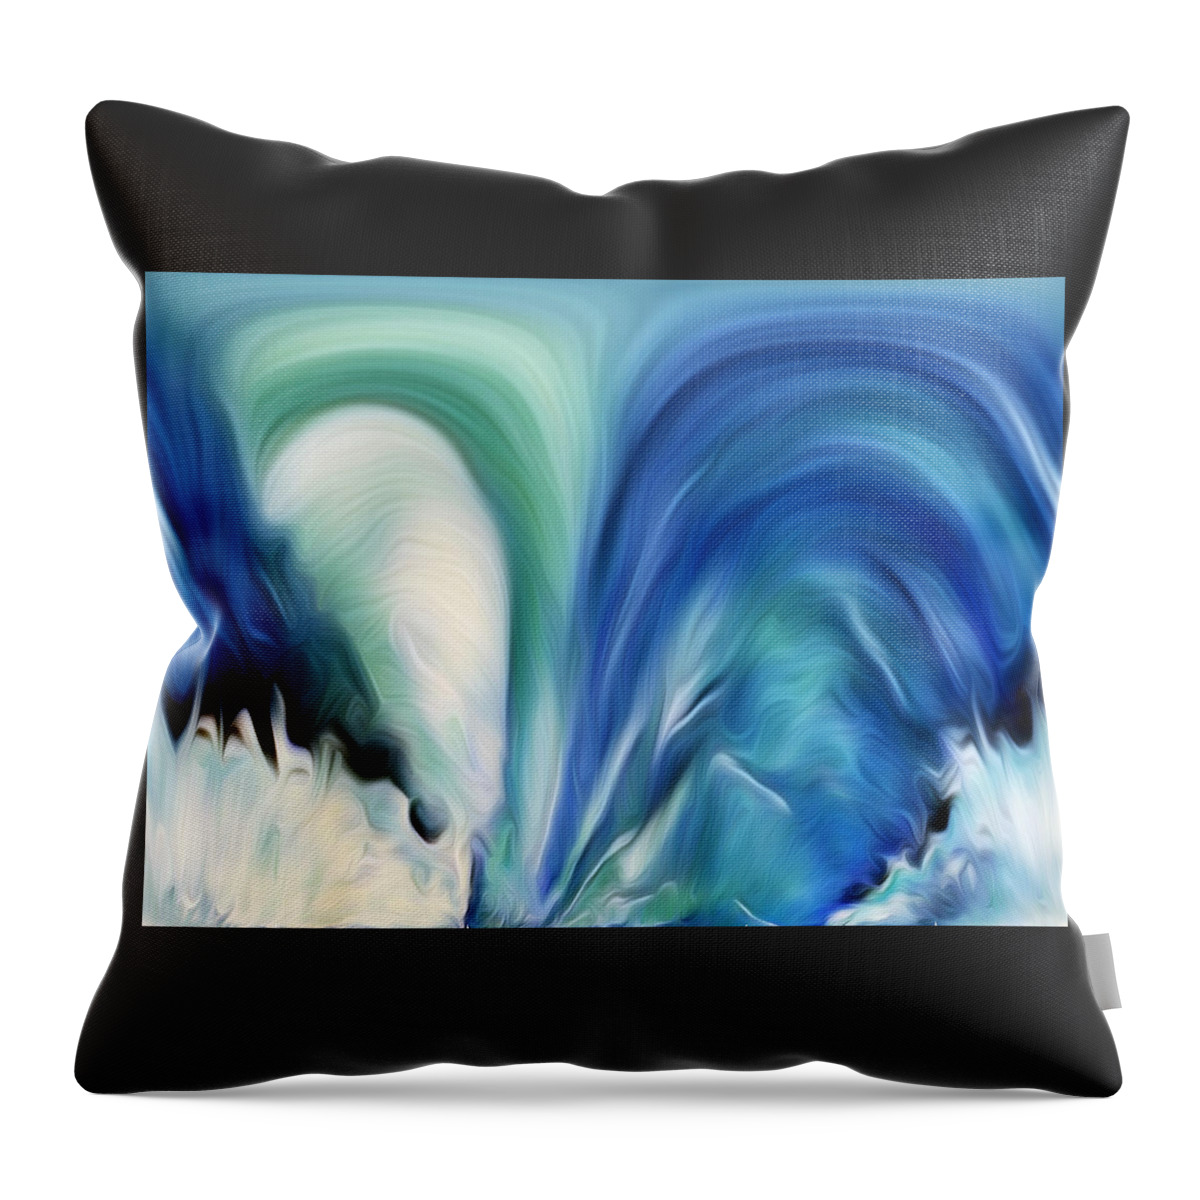 Abstract Art Throw Pillow featuring the digital art Feathered Waterfall by Ronald Mills